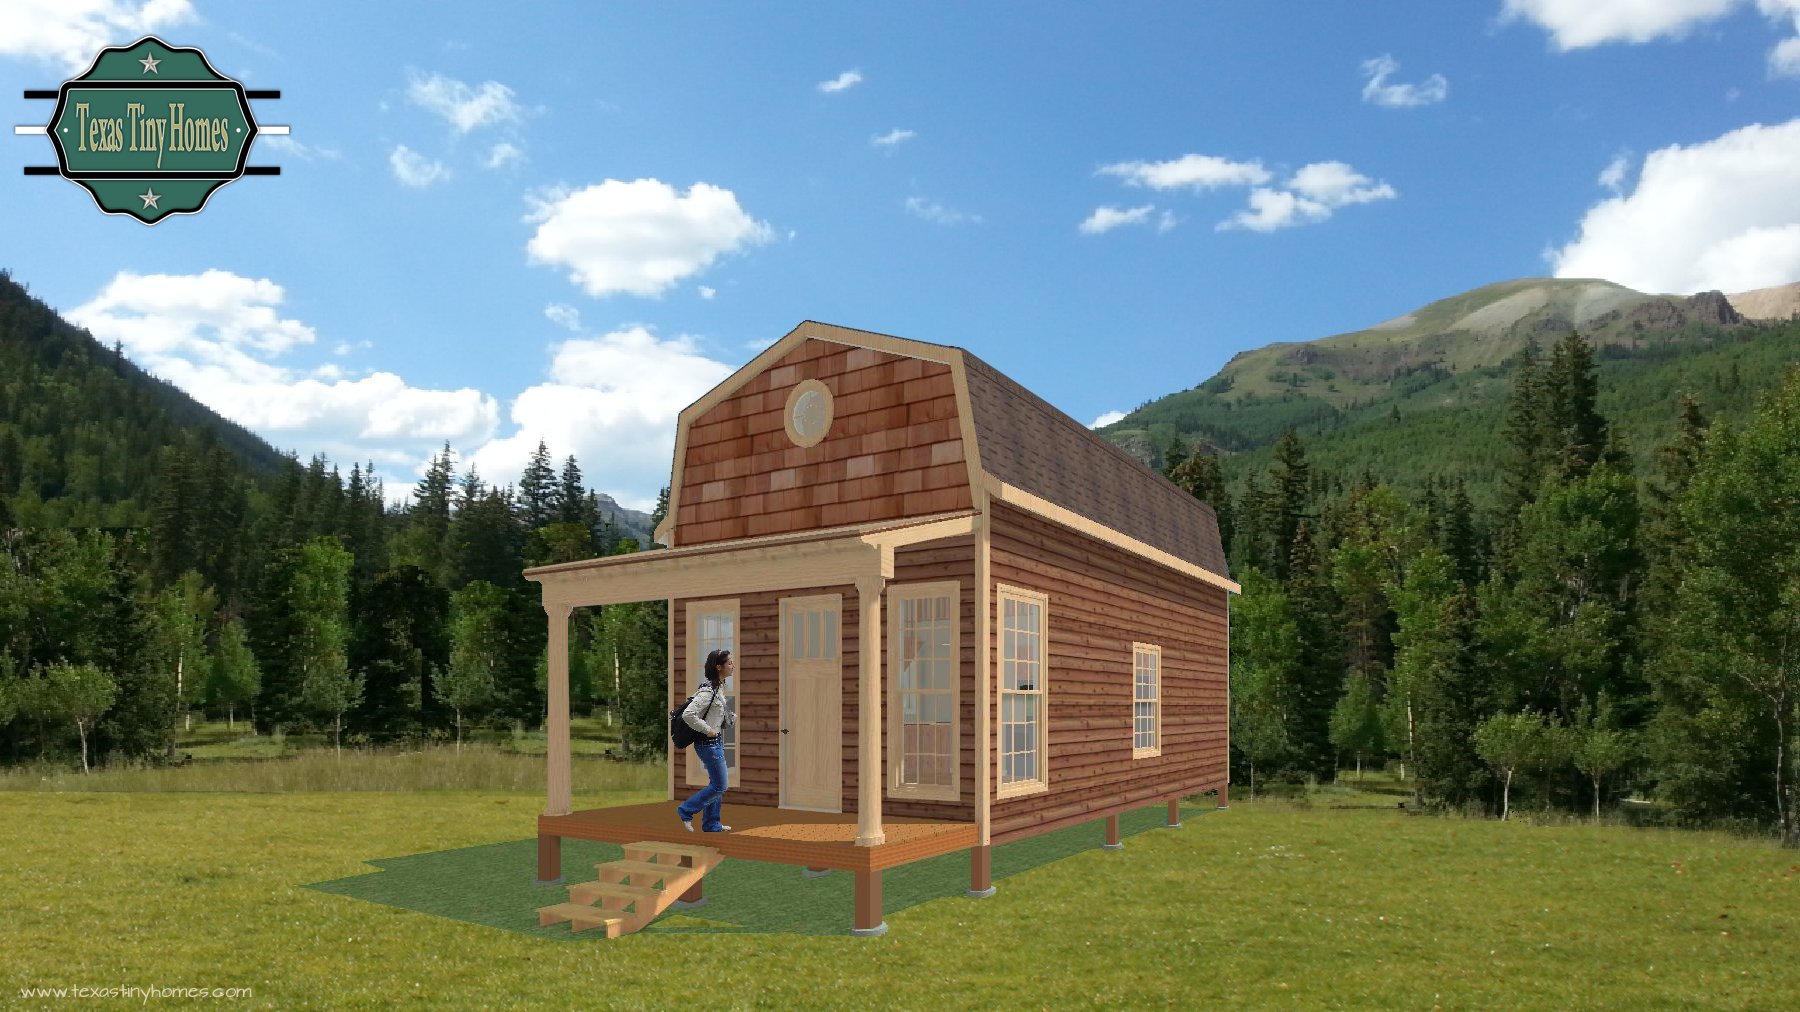 Tiny House Plans, Small House Plans, Micro Home Plans, Guest House Plans, Mother In Law Suites, Mother In Law House Plans, Small Homes Texas, Texas Tiny Homes, Fort Worth Tiny Homes,